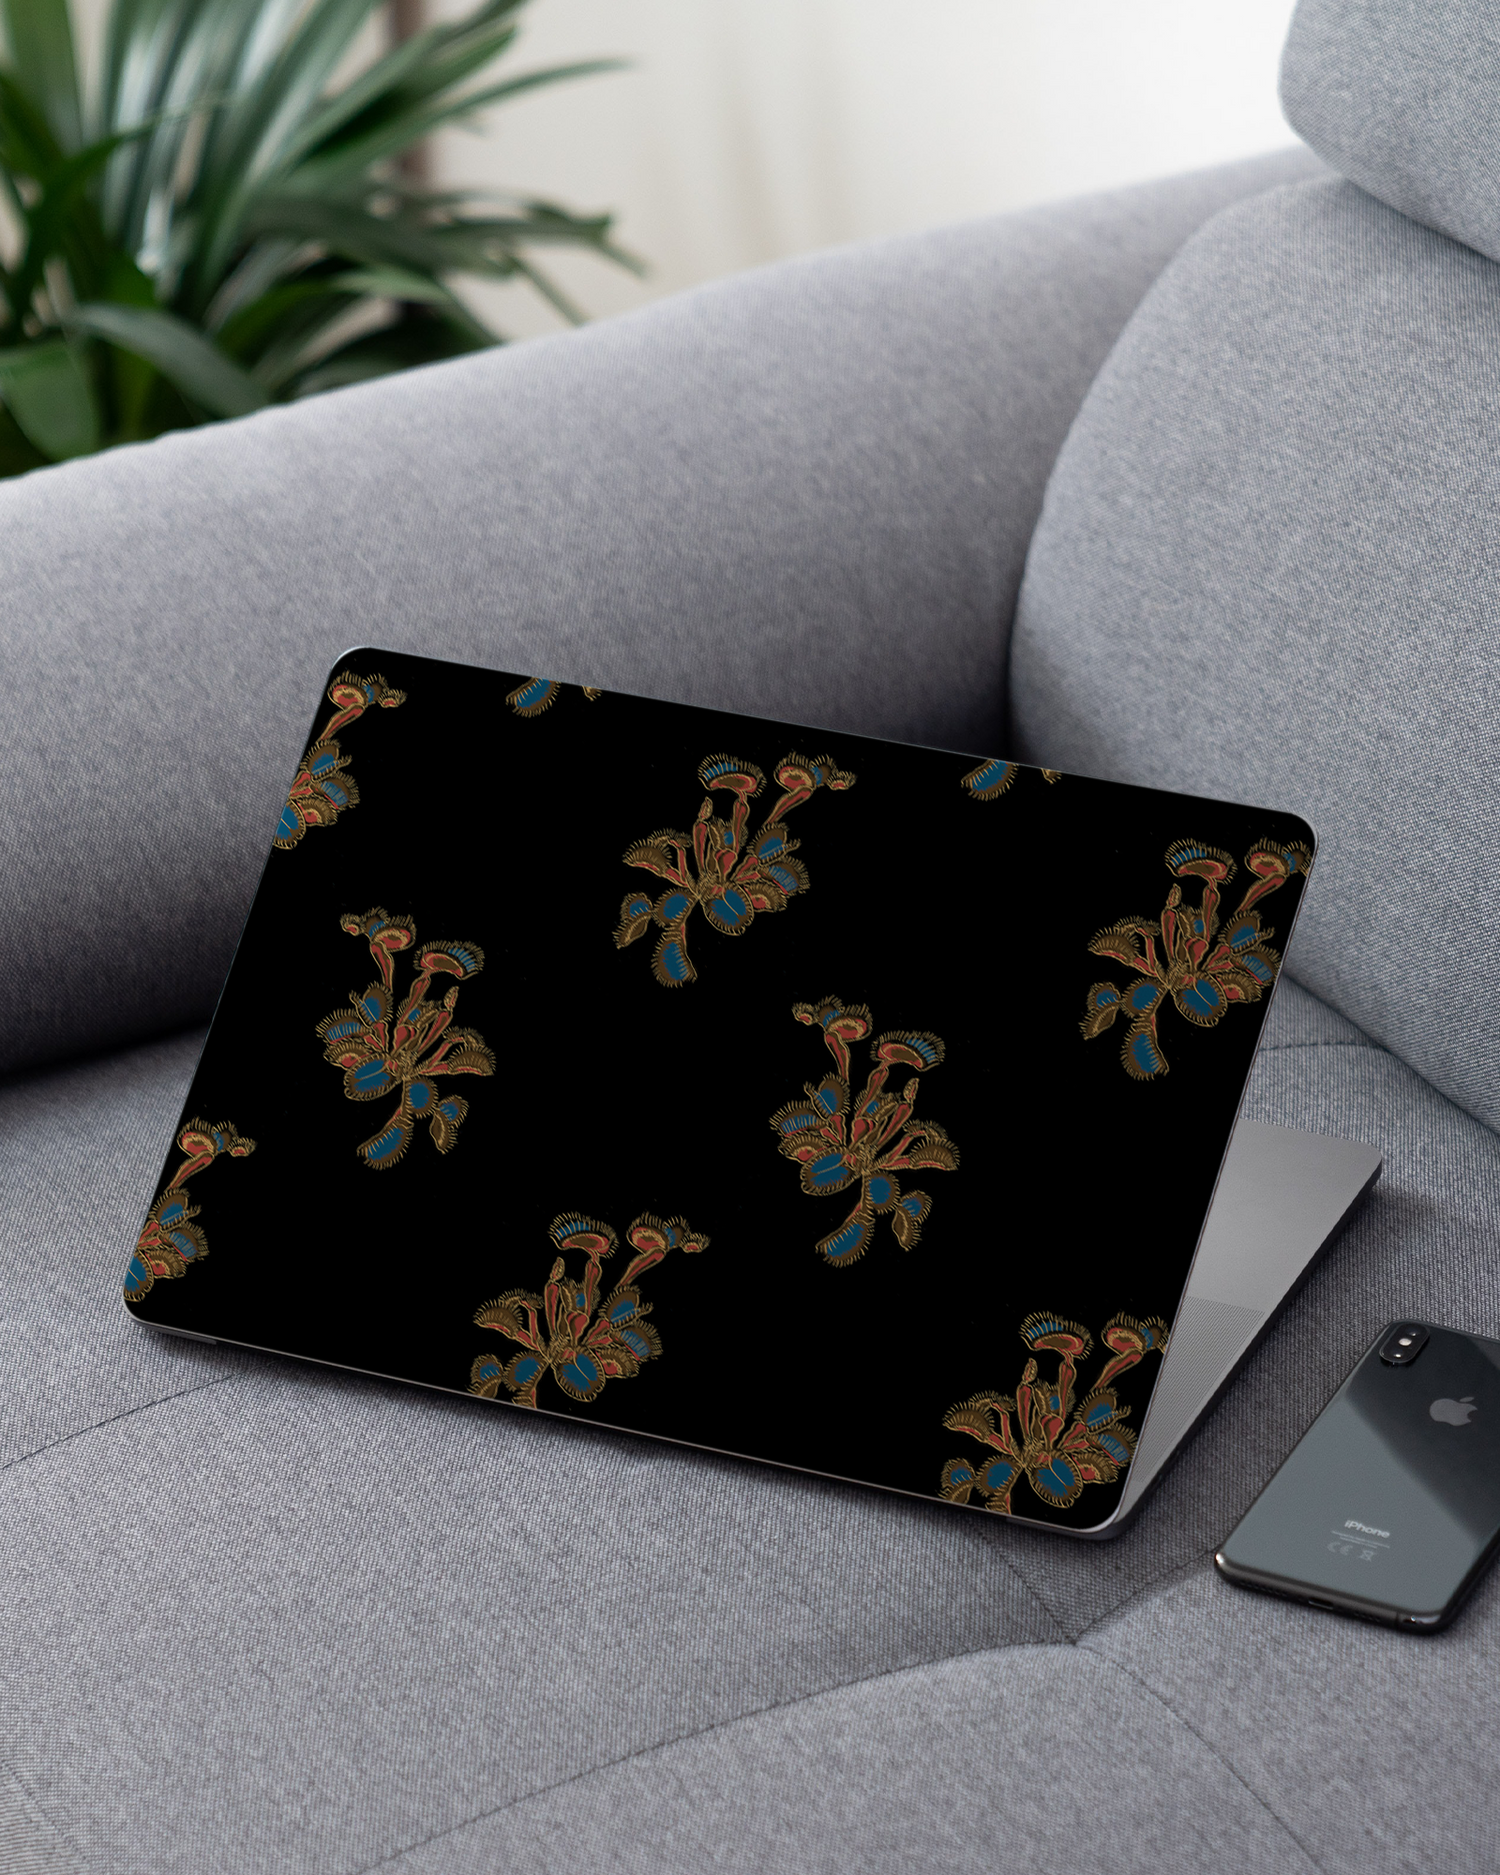 Venus Fly Trap Laptop Skin for 13 inch Apple MacBooks on a couch